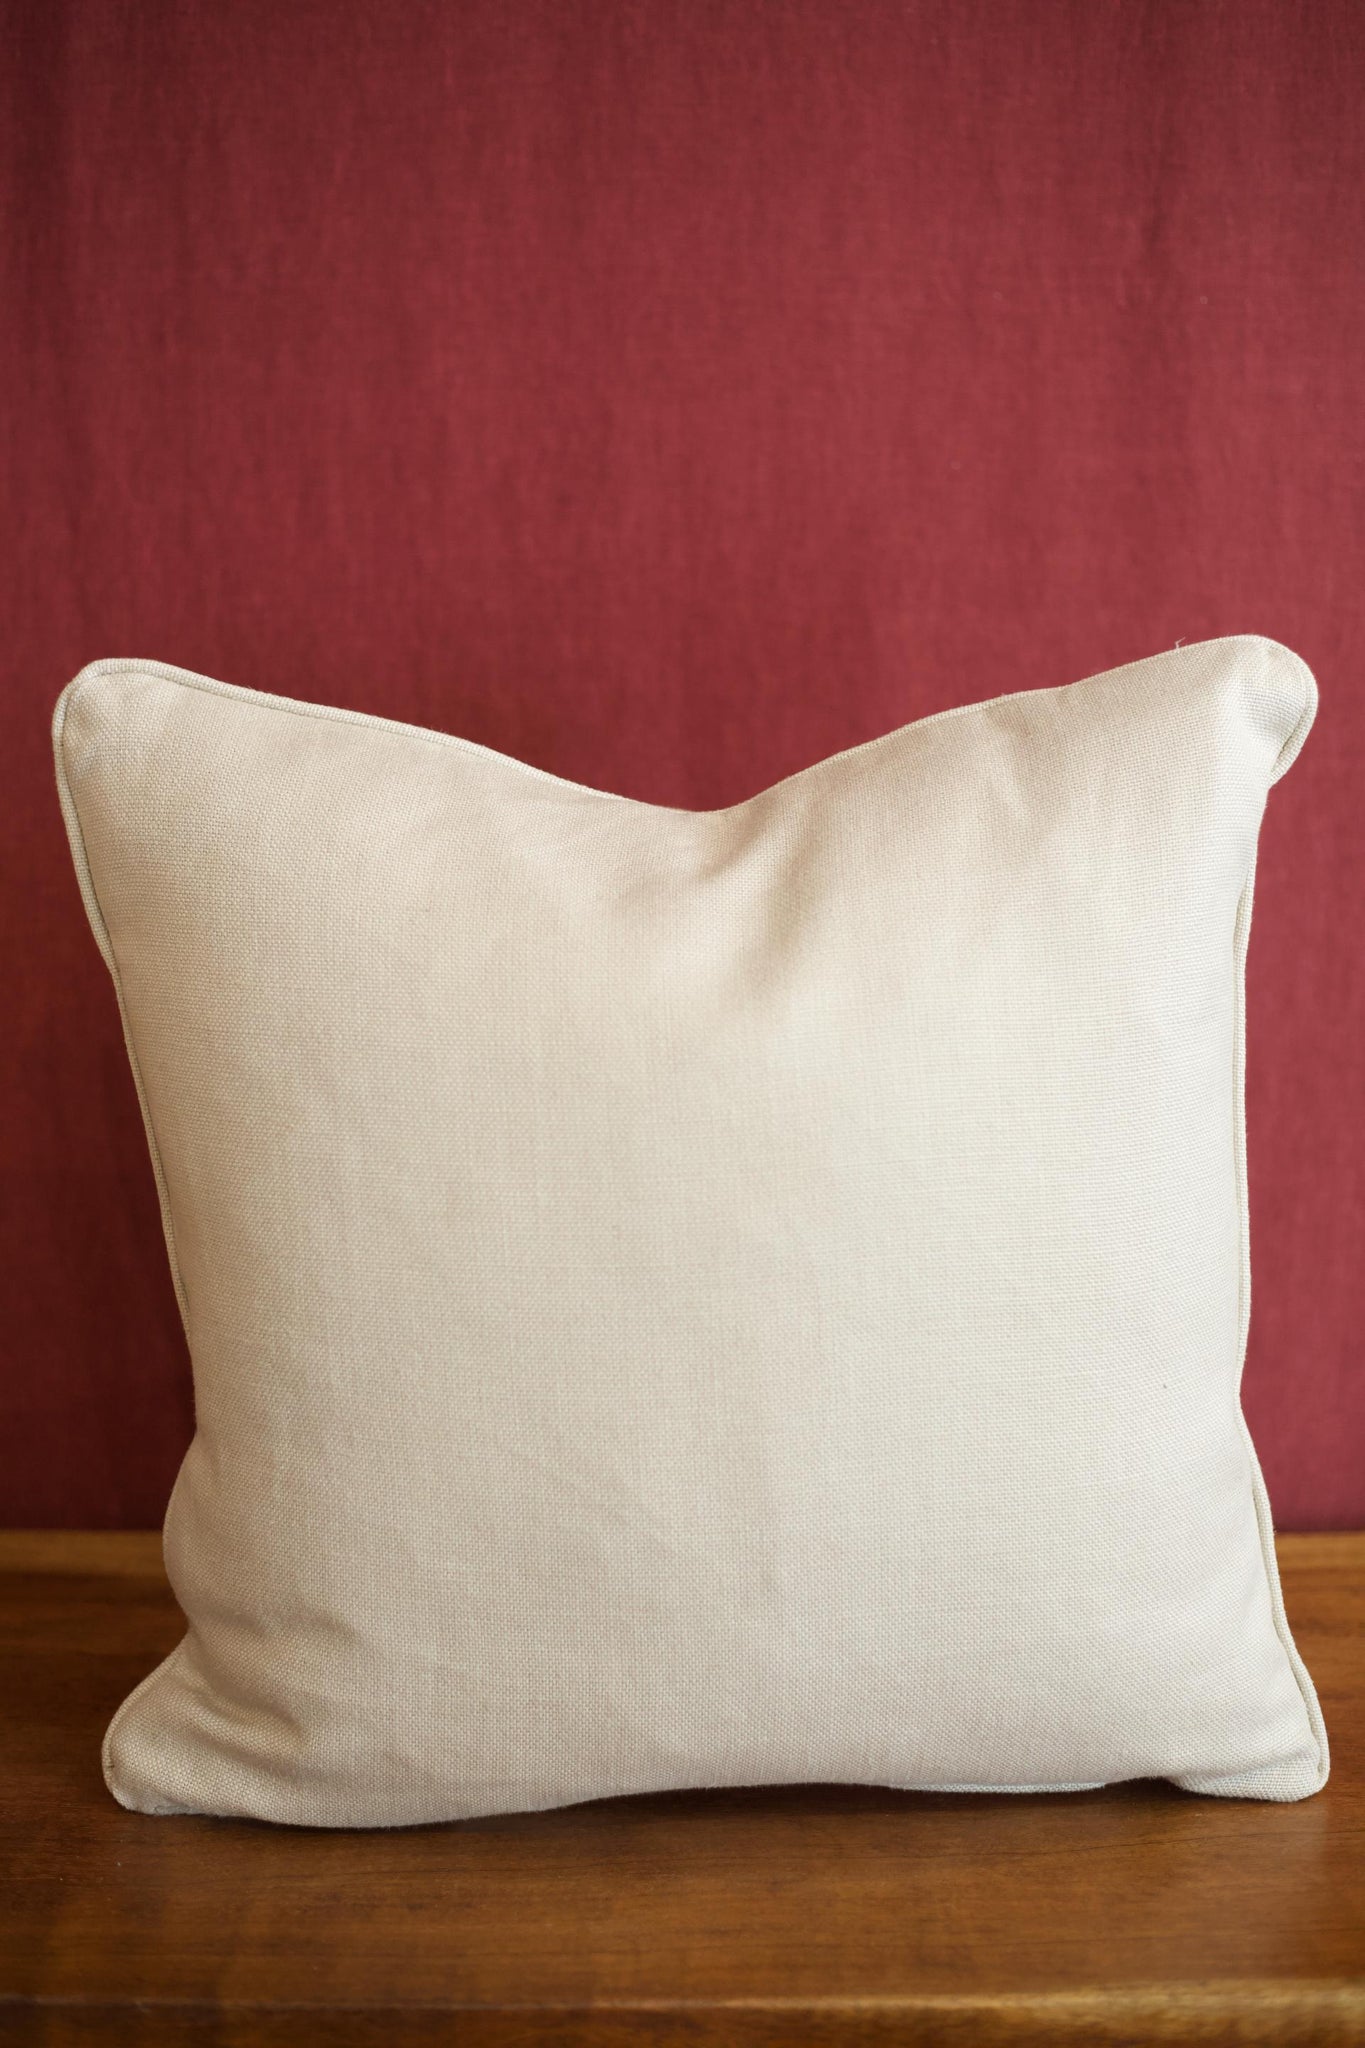 Cement grey linen scatter cushions - 20 inch